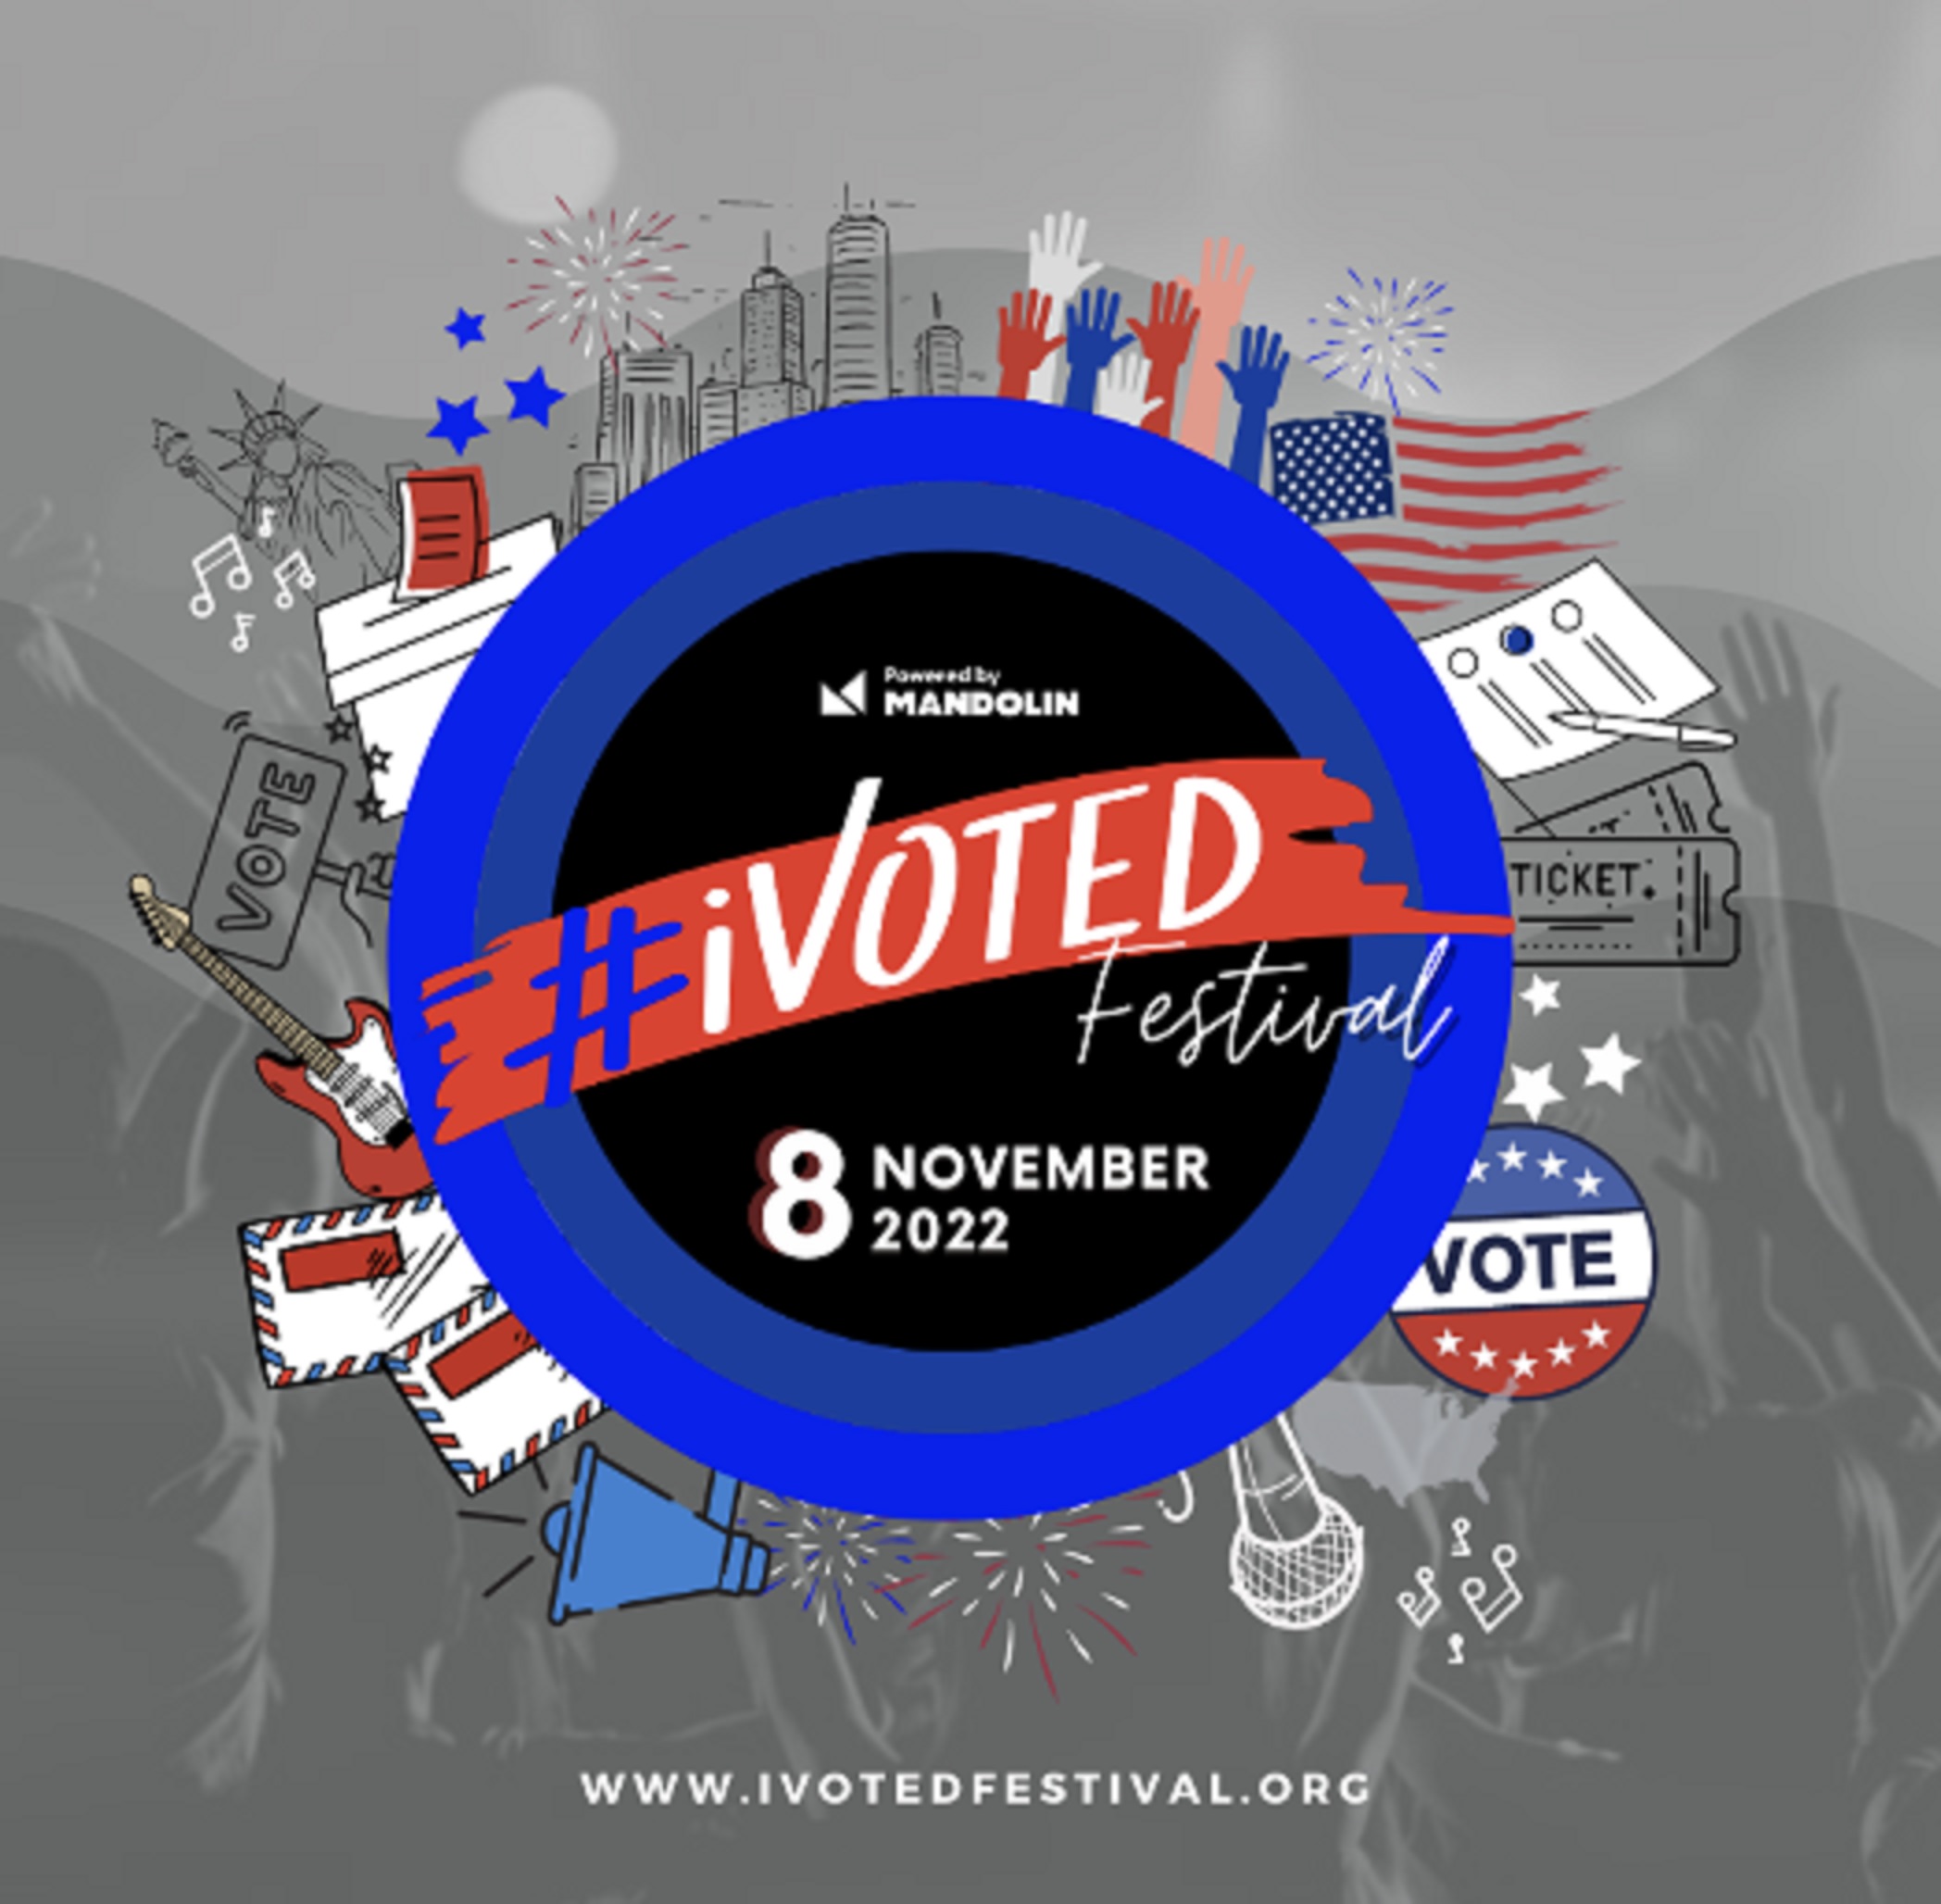 #iVoted Festival webcast set for election night tomorrow